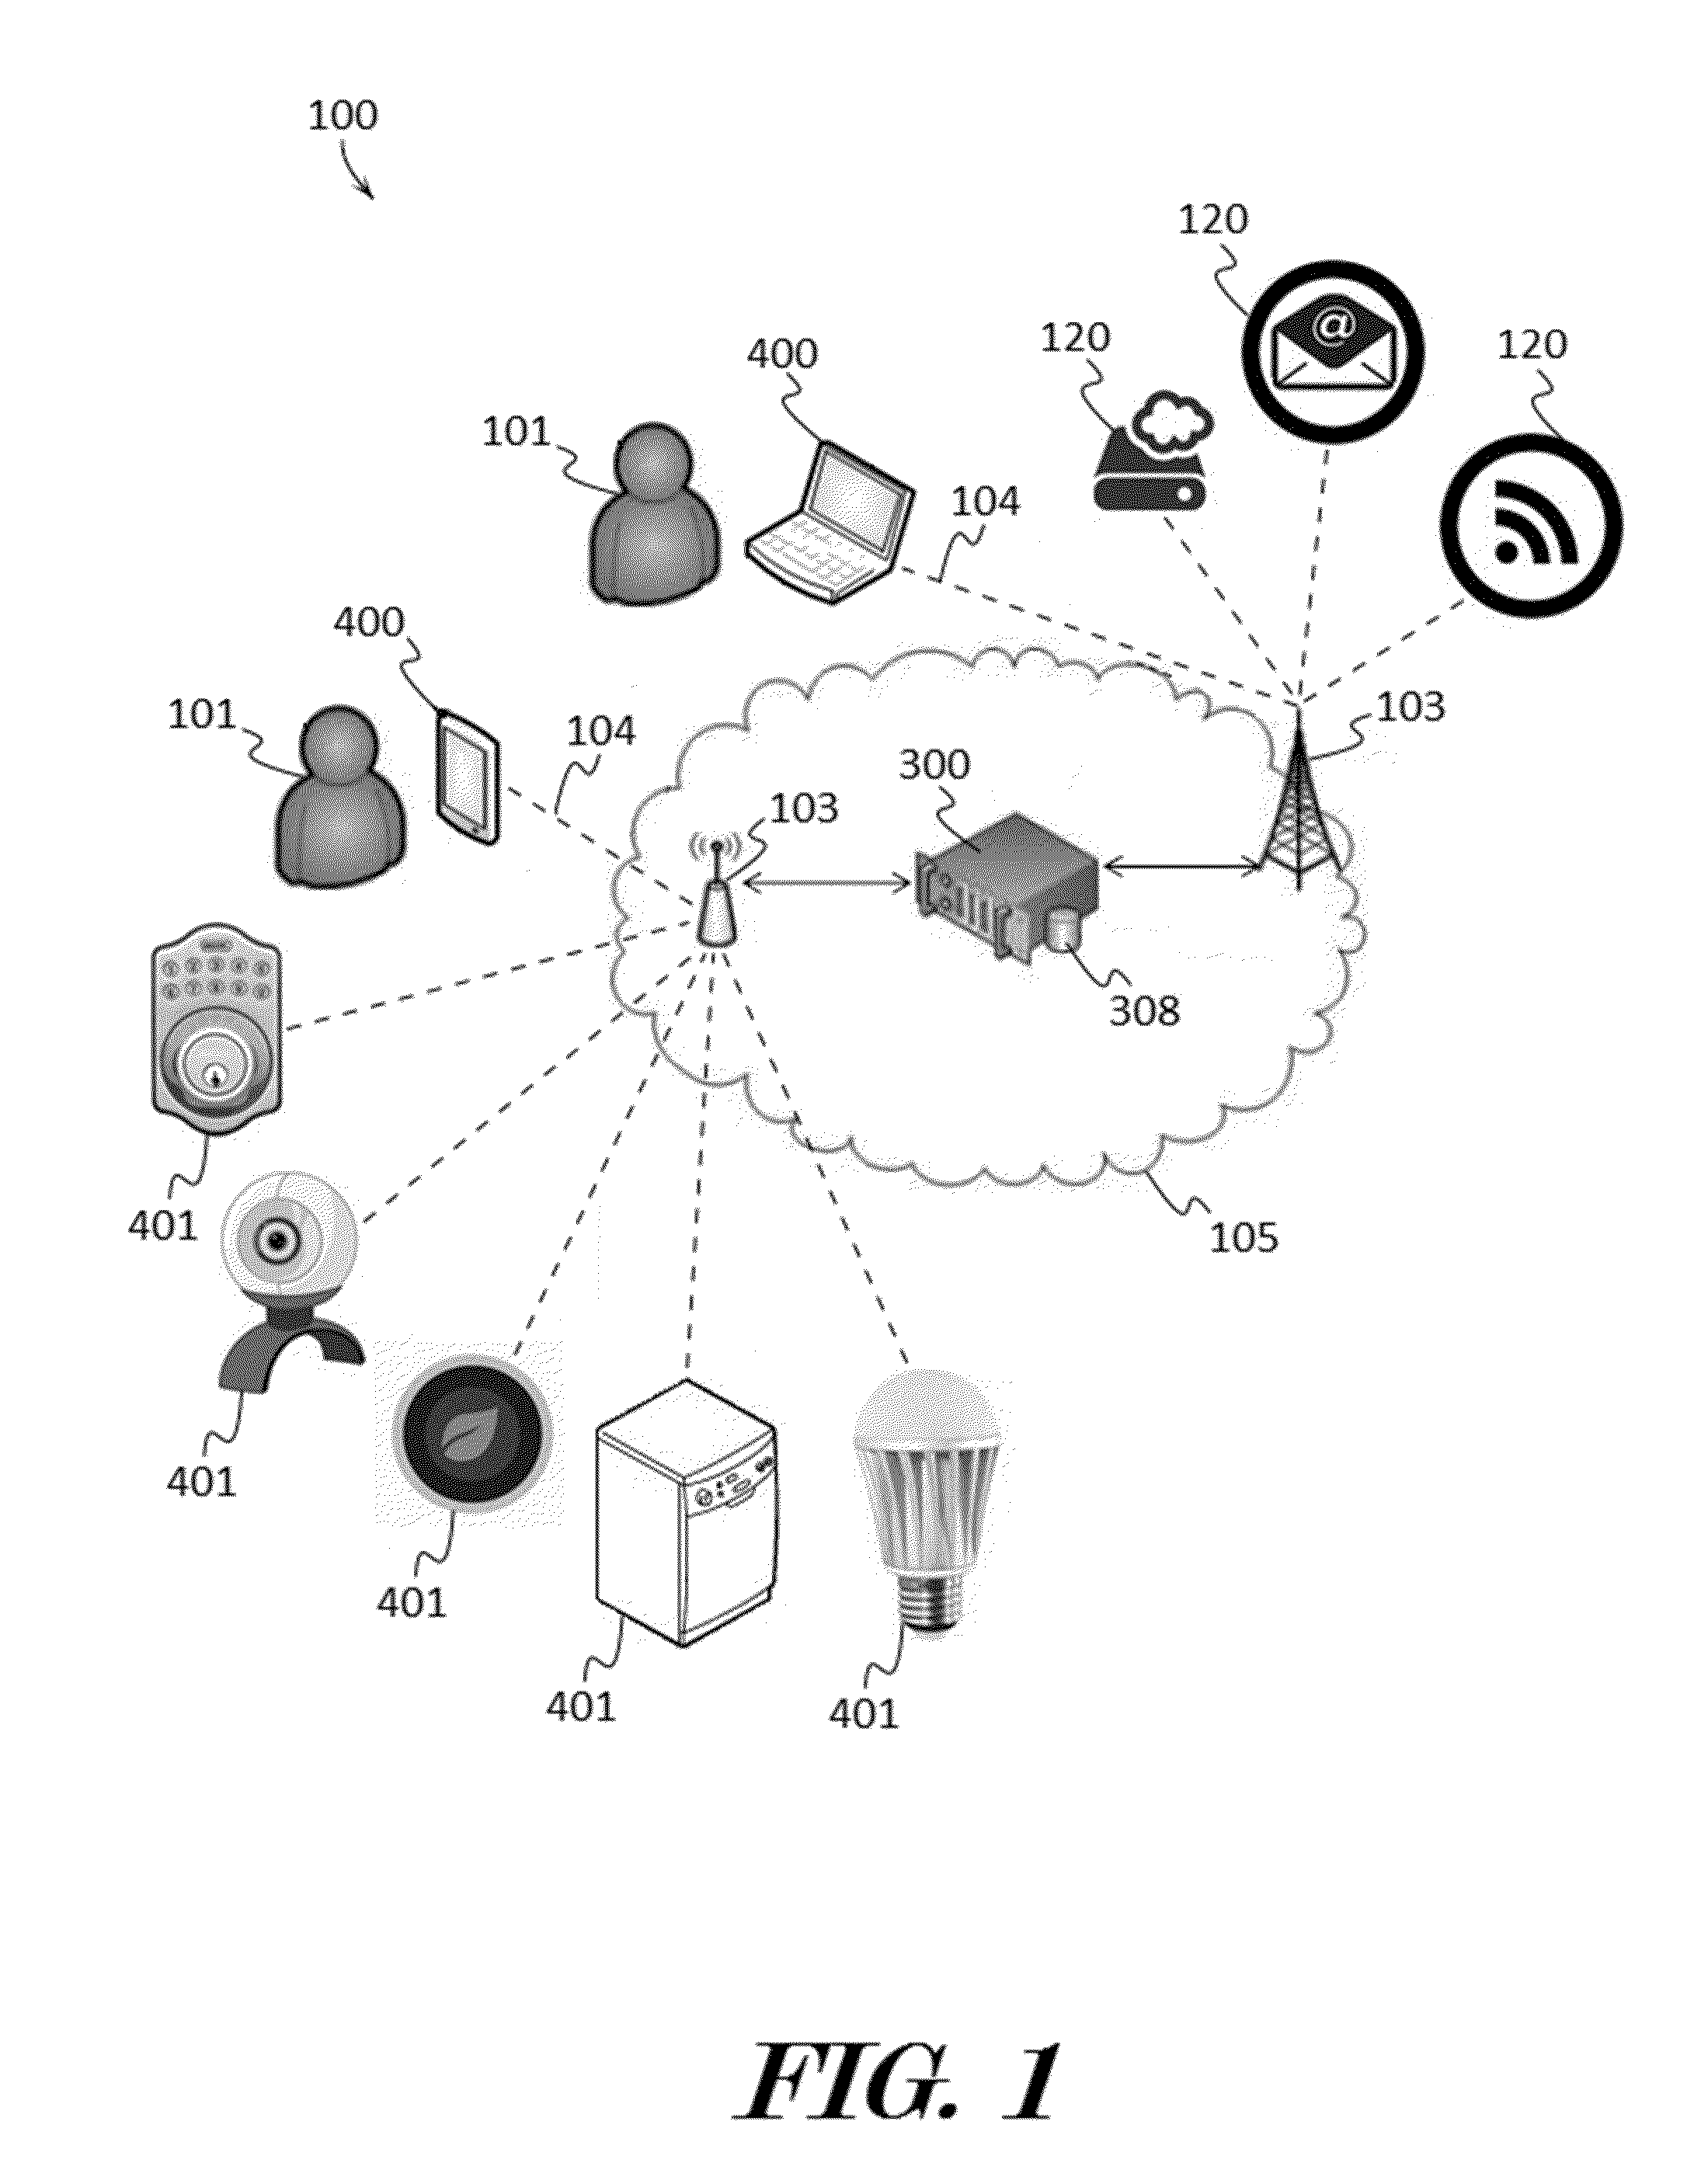 Methods and systems for communicating with electronic devices